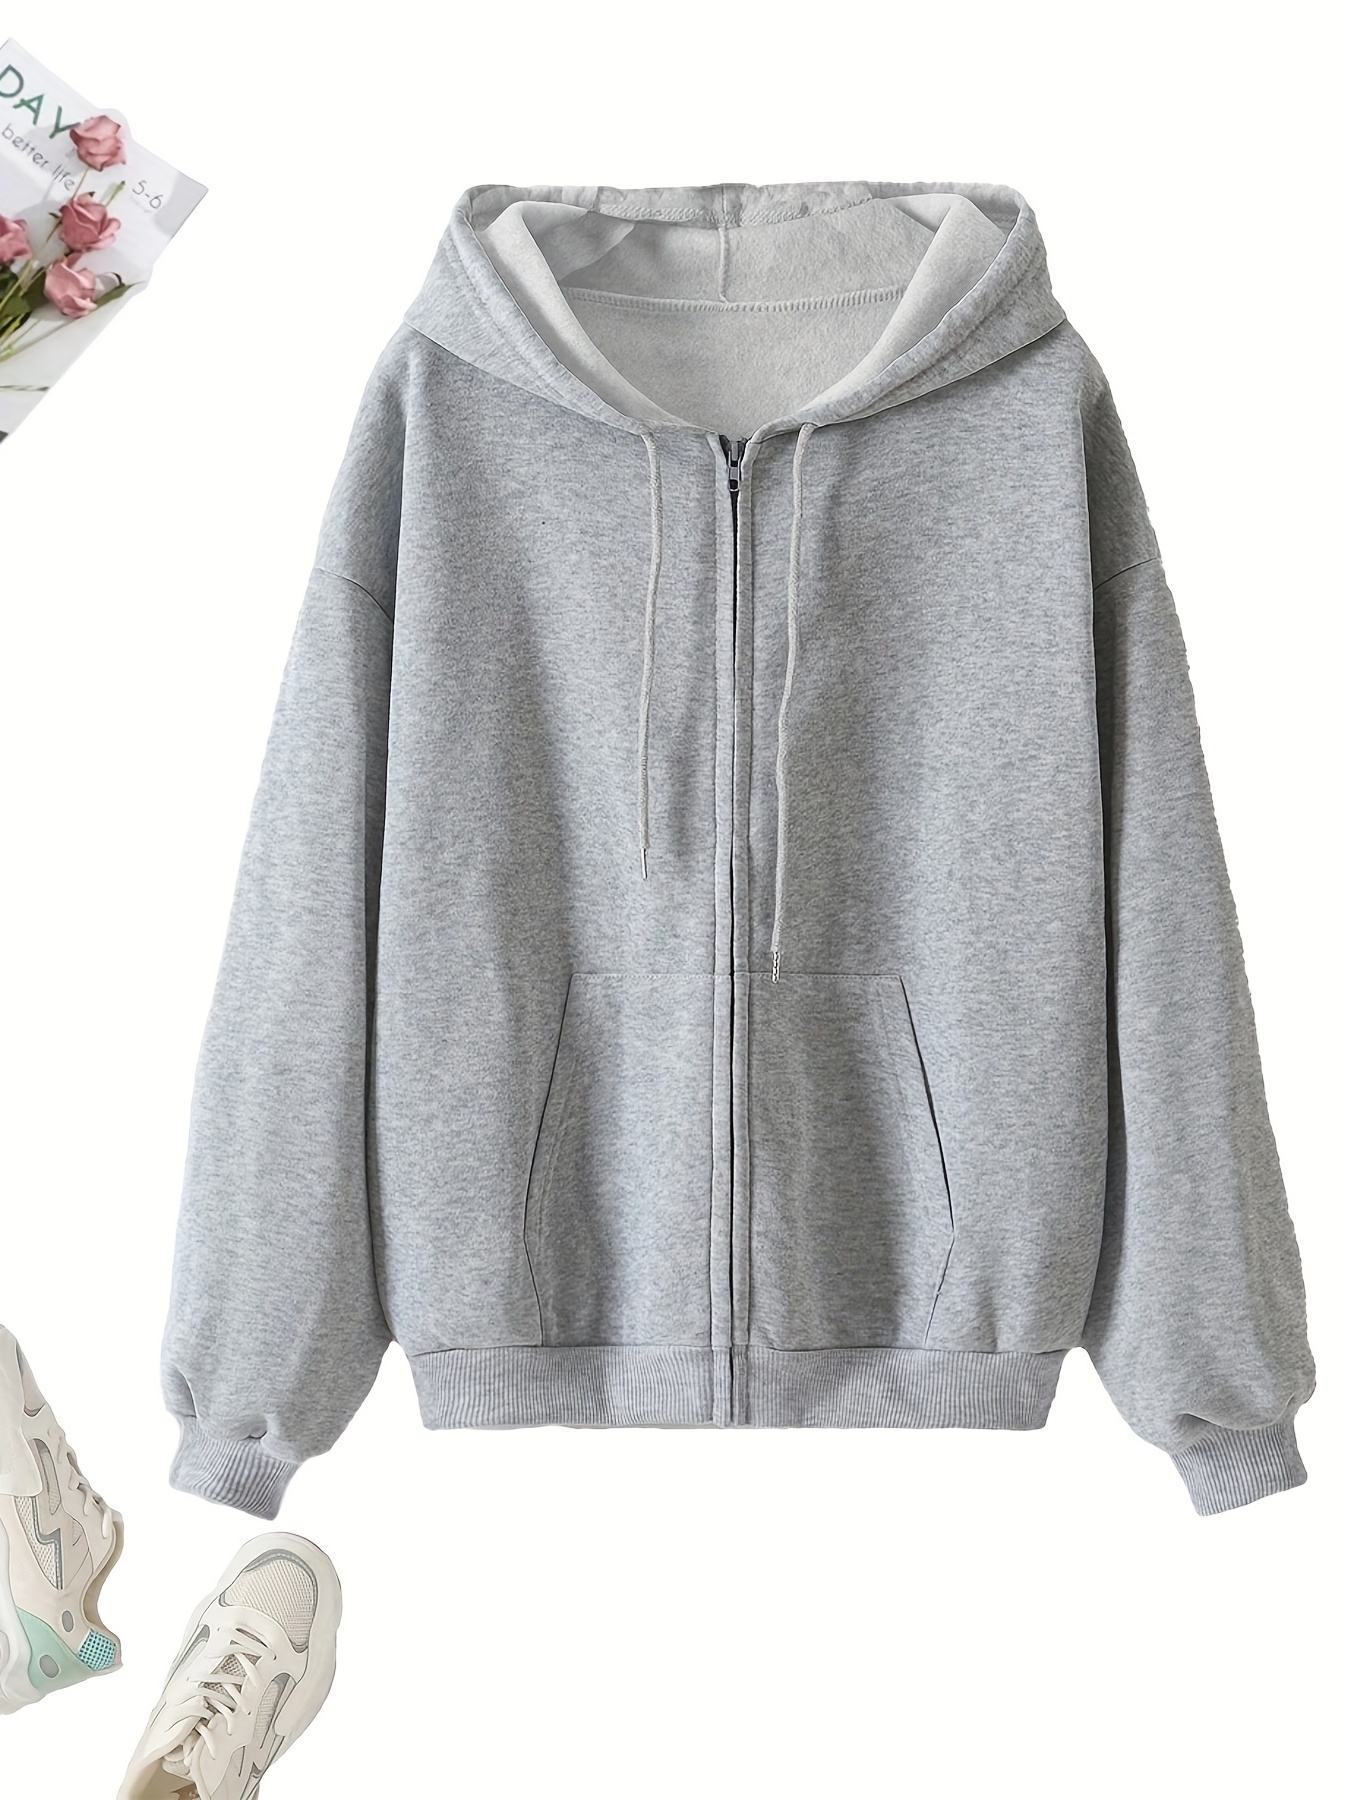  Womens Hoodie Pullover Casual Plain Basic Sweatshirt with Hood  Solid Color Oversized Long Sleeve Hoodies Black : Sports & Outdoors